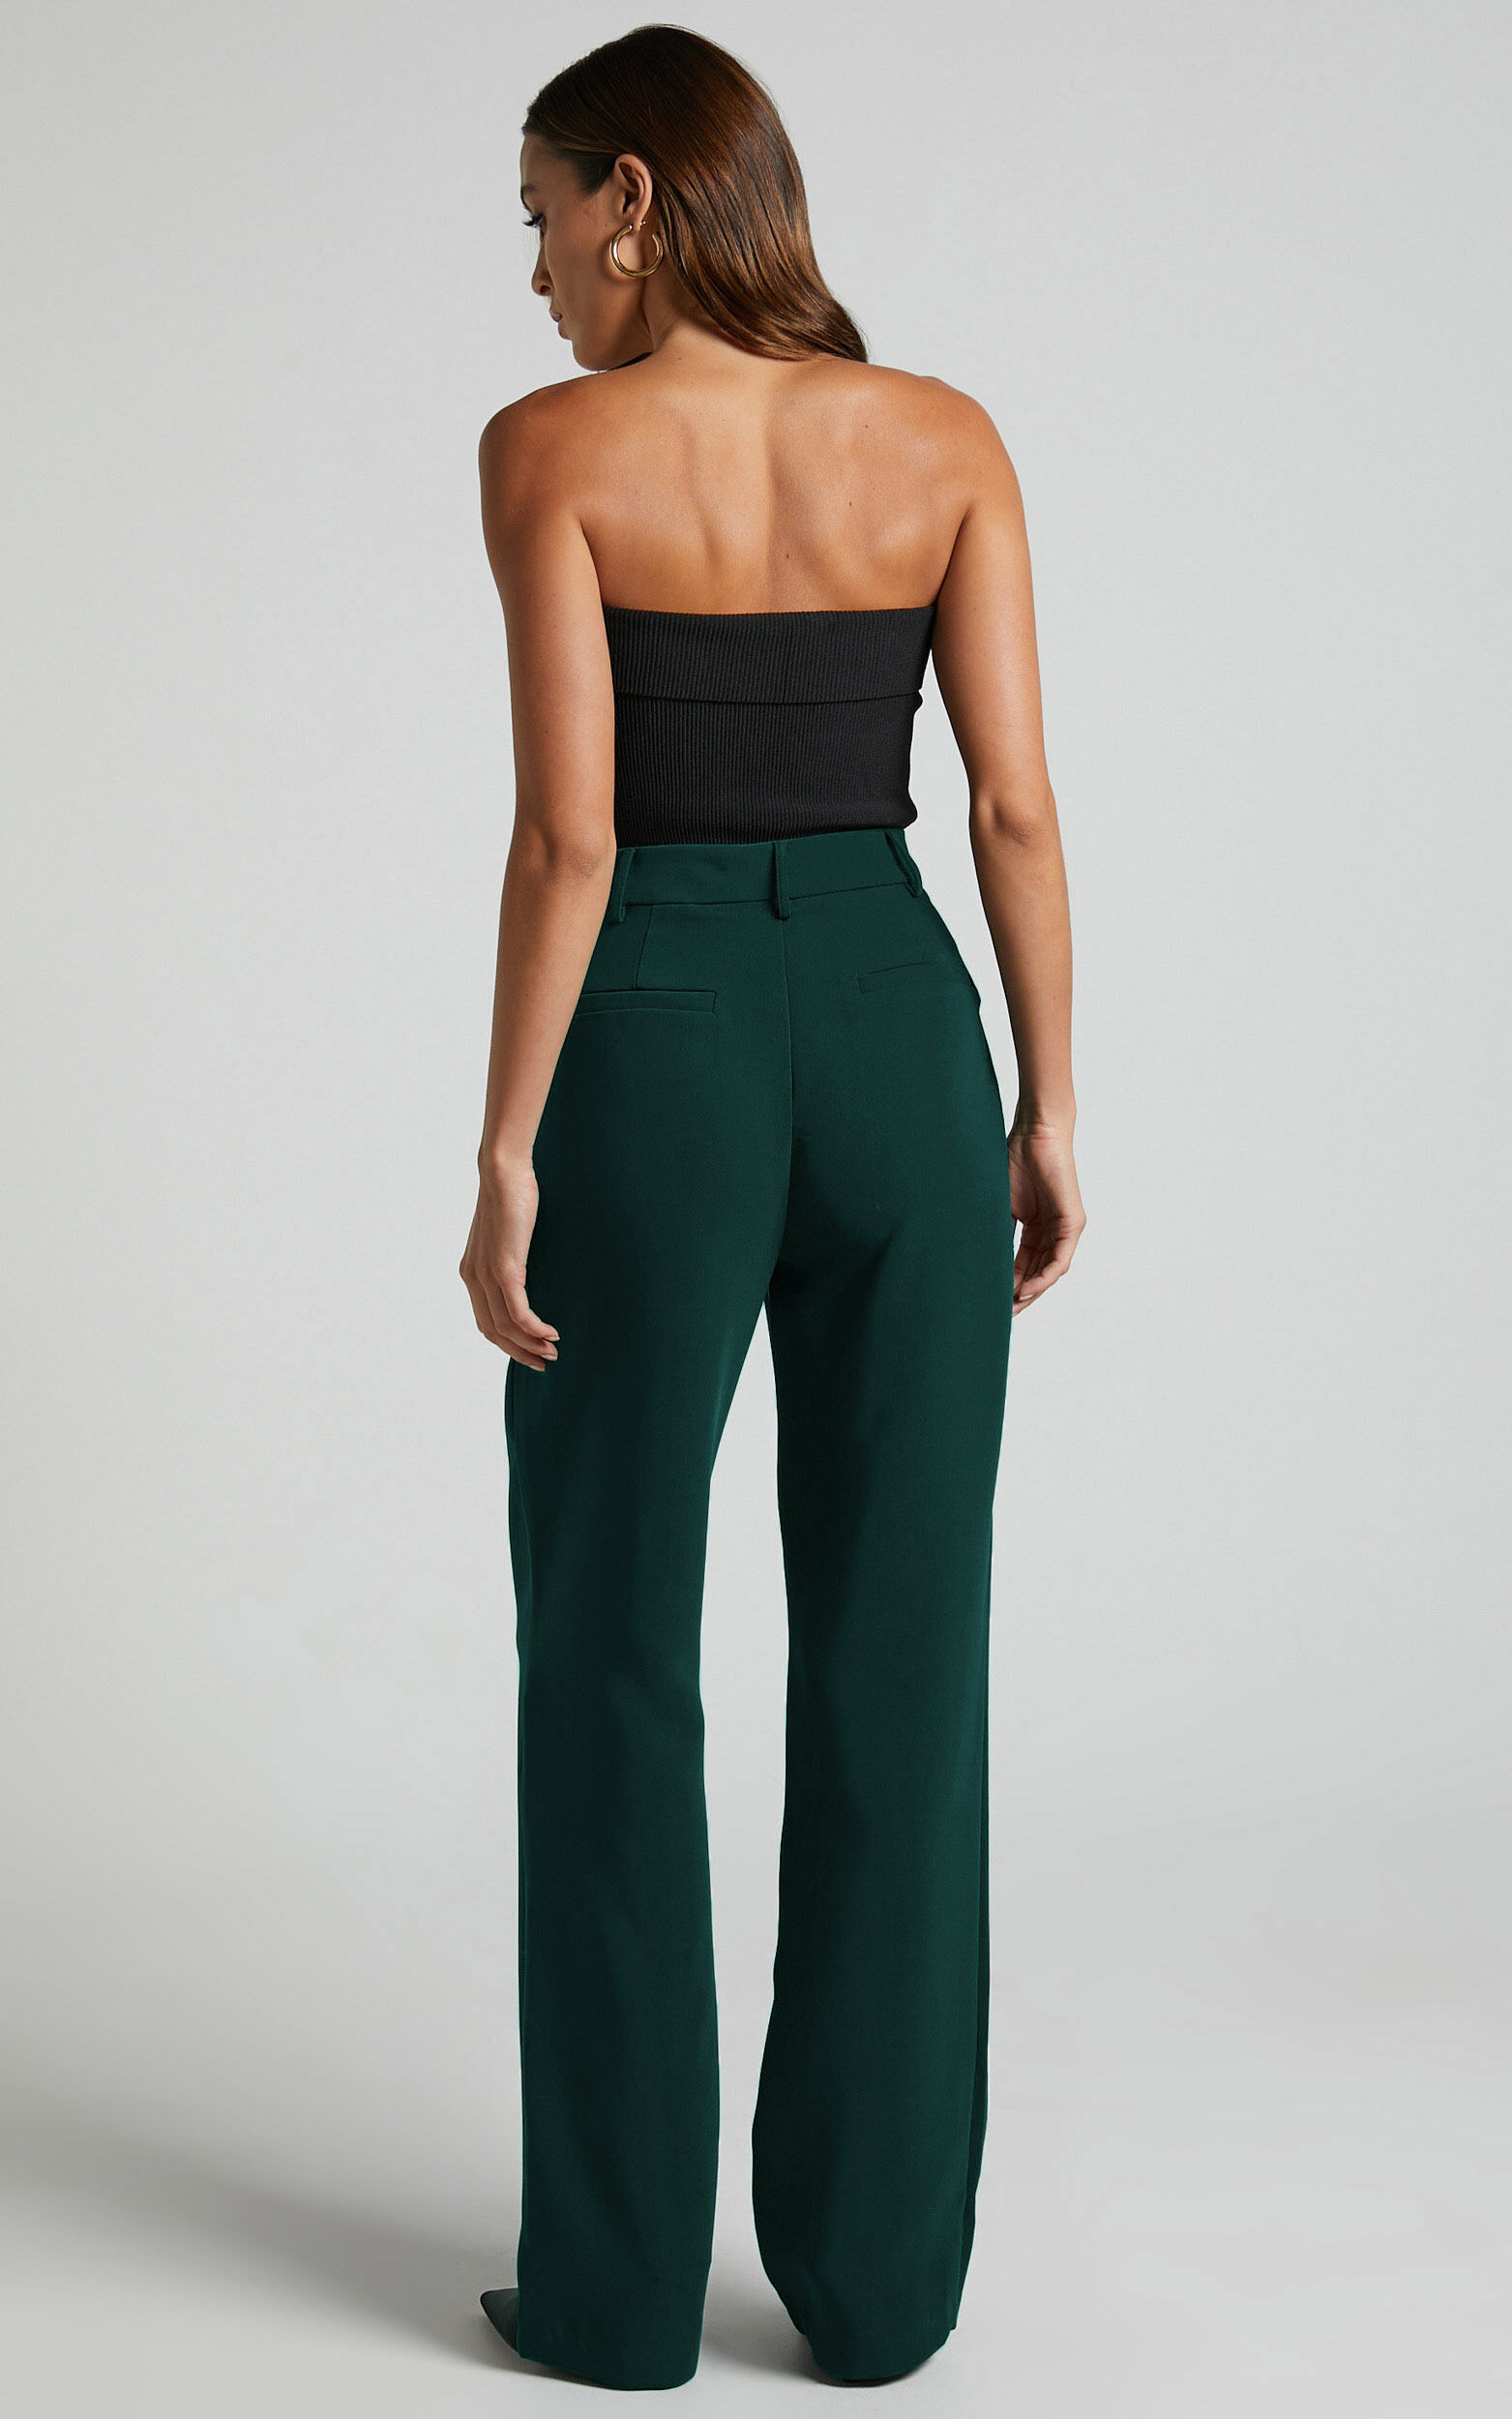 Waisted High Green Lorcan Showpo - Pants USA Forest Tailored in Pants |